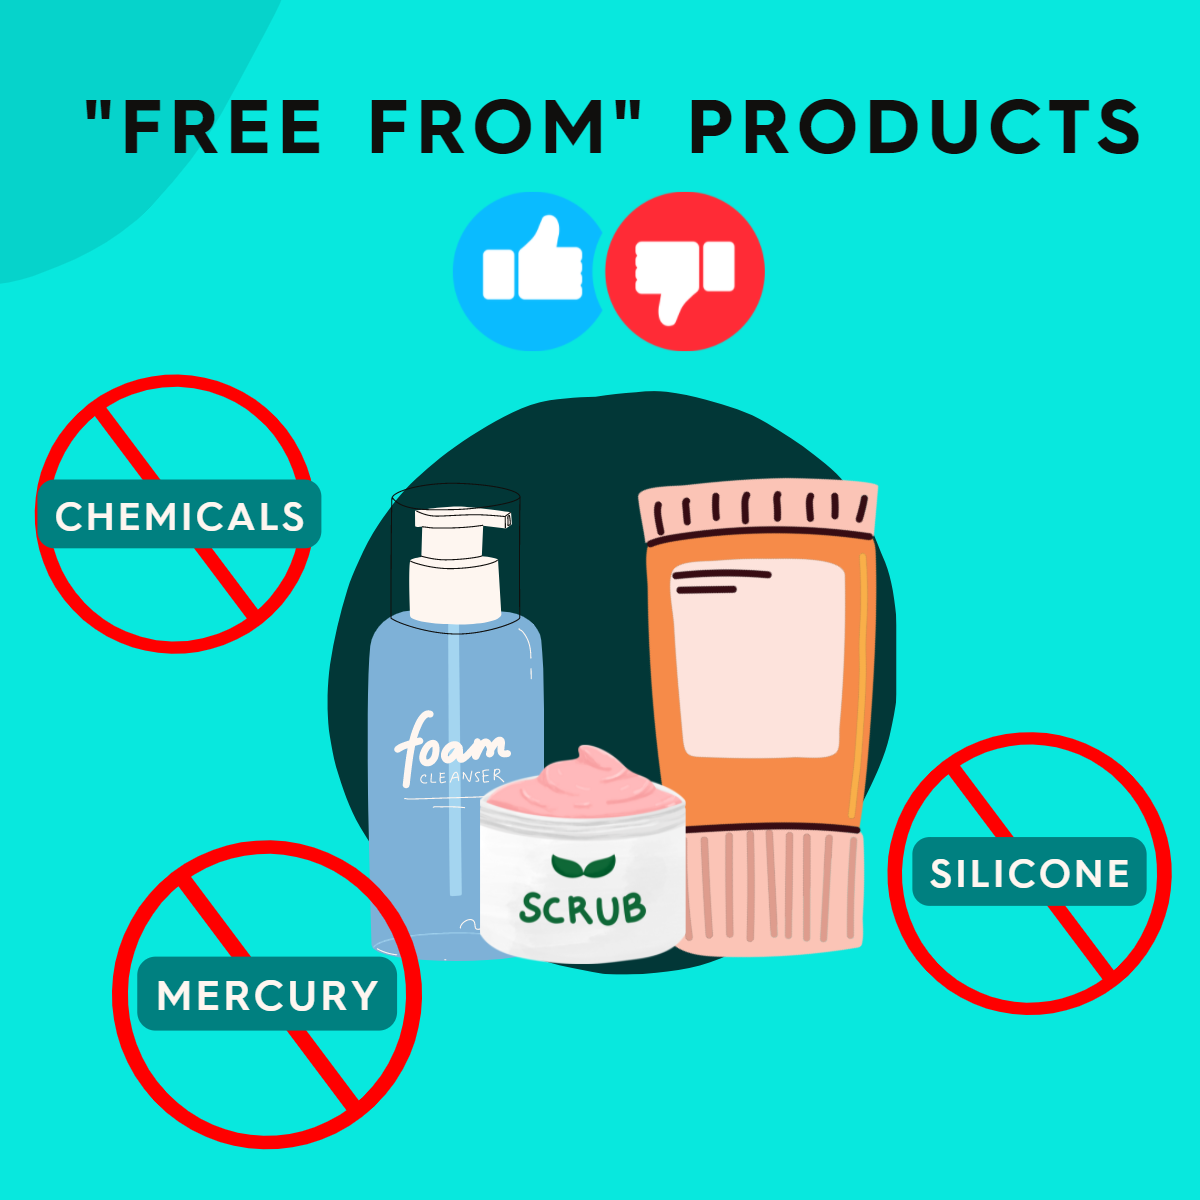 Are “Free From” Products Better?